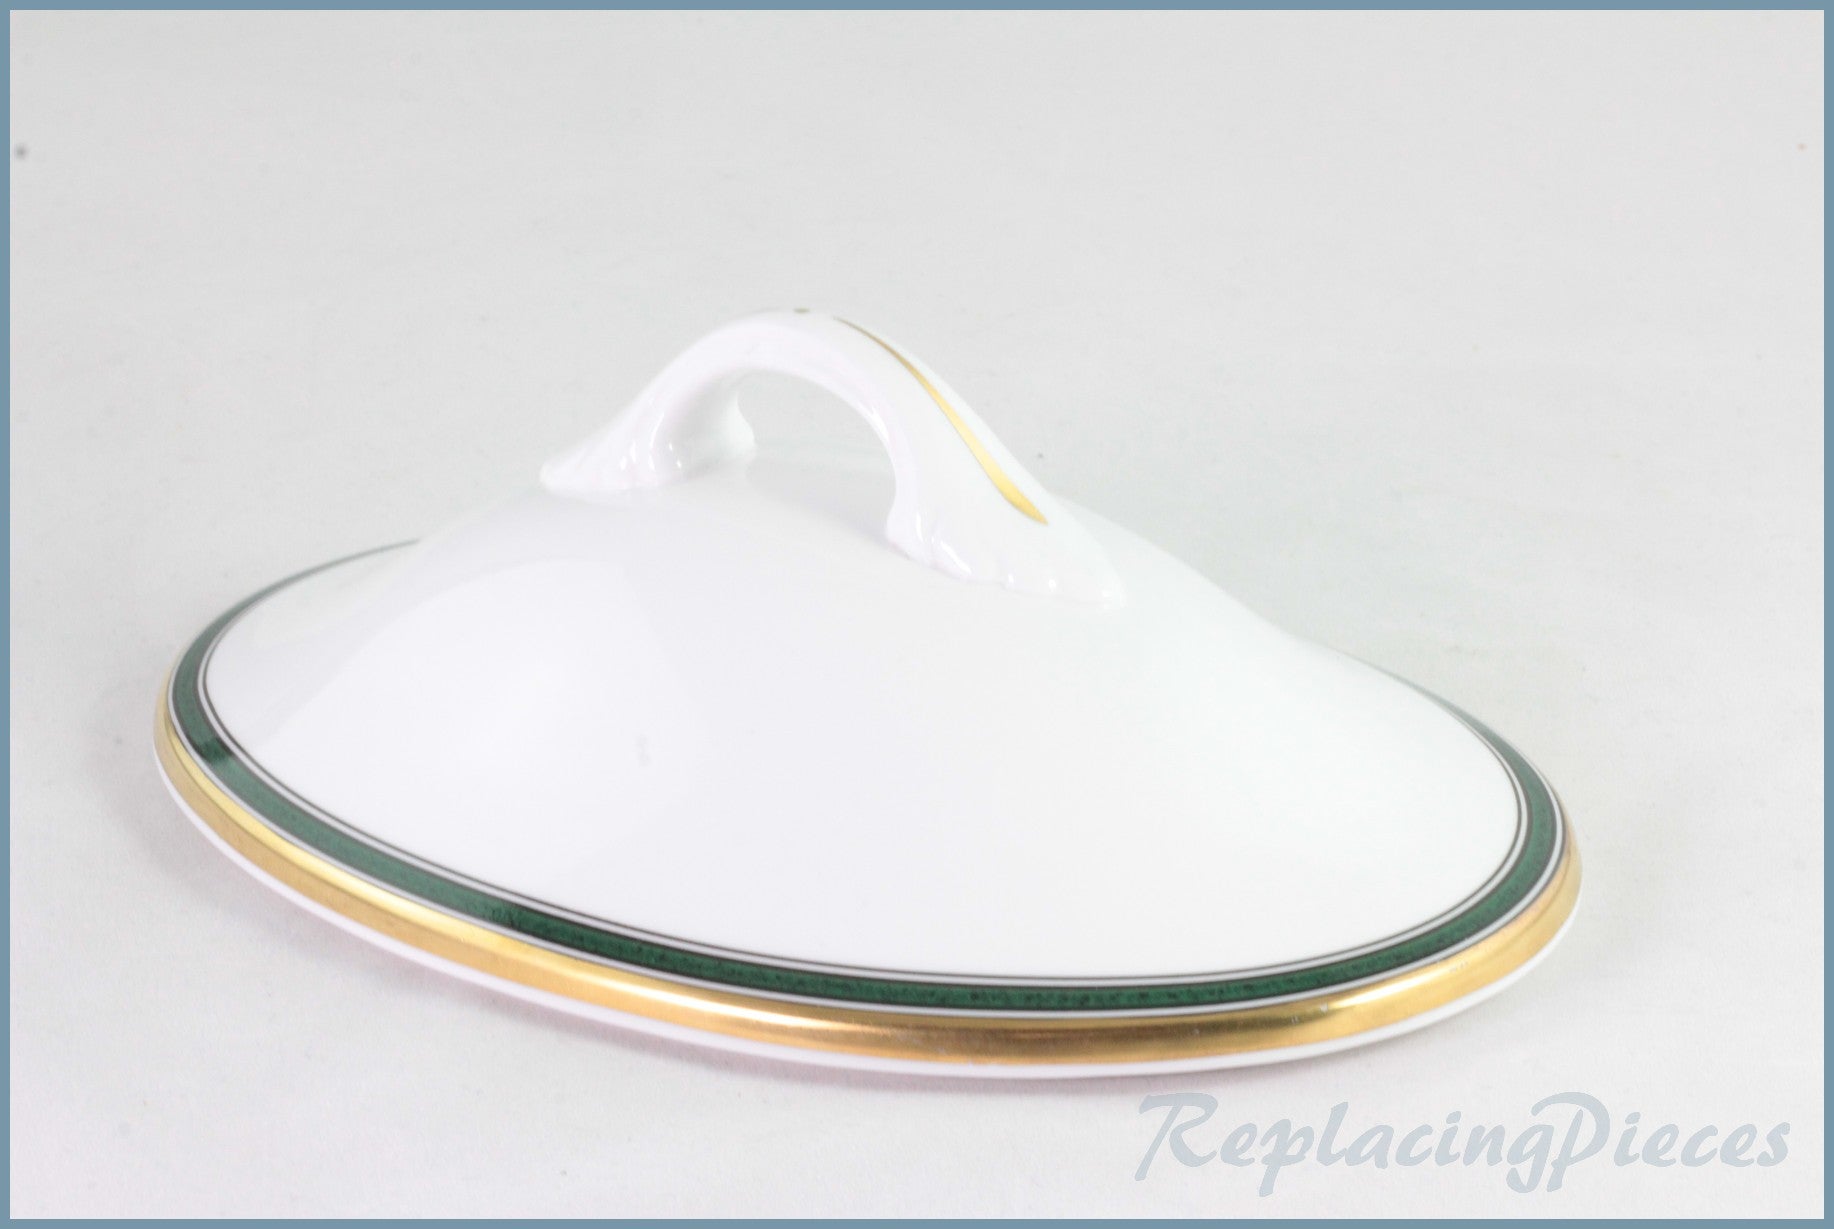 Spode - Tuscana (Y8578) - Lidded Vegetable Dish LID ONLY